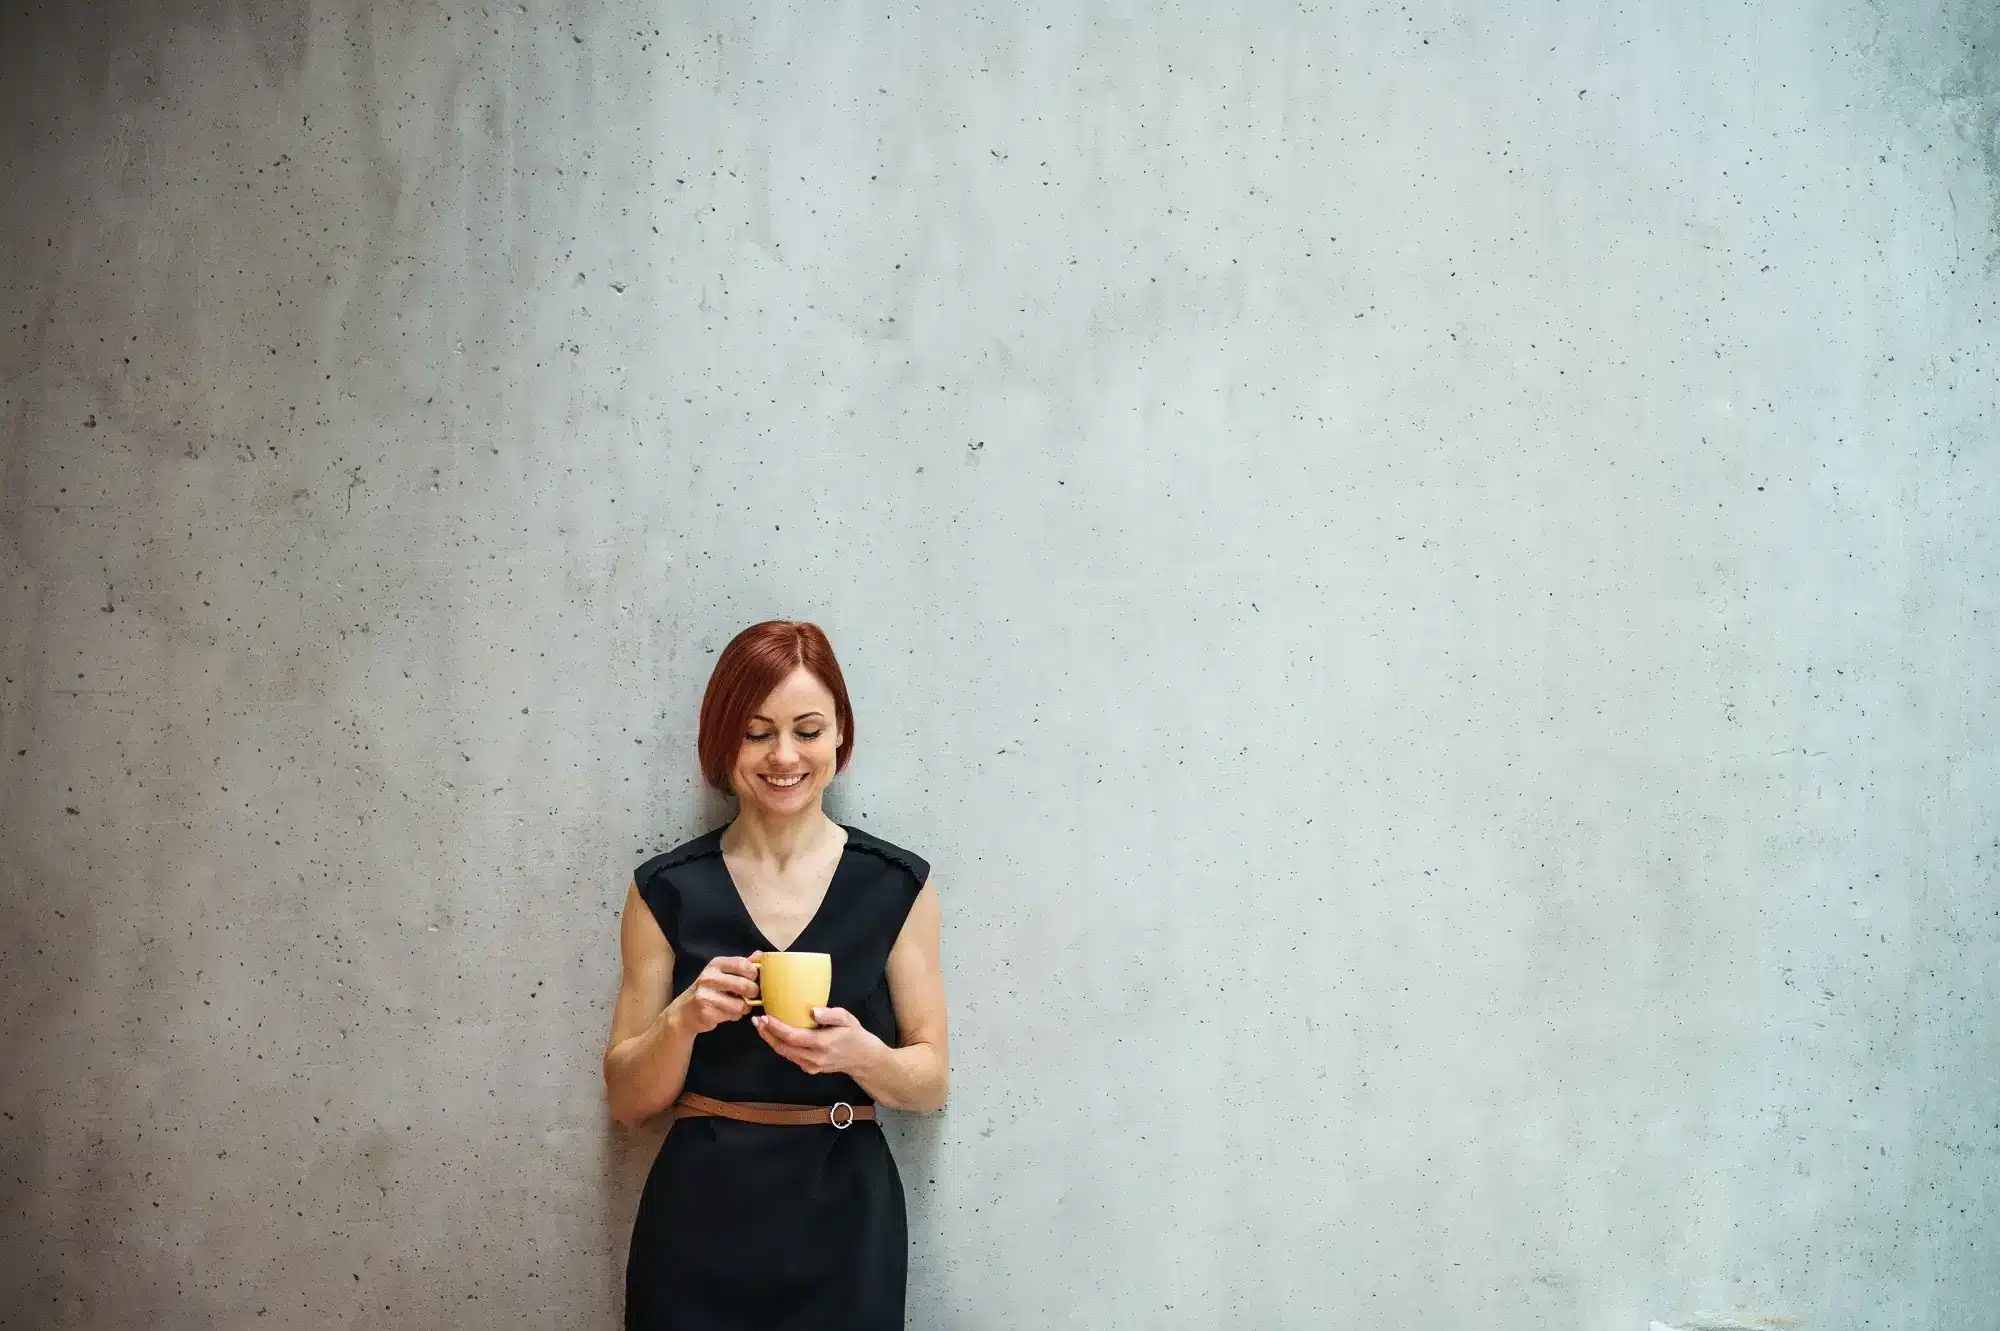 A woman leaning against a grey concrete wall, representing the concept of director penalty notice.